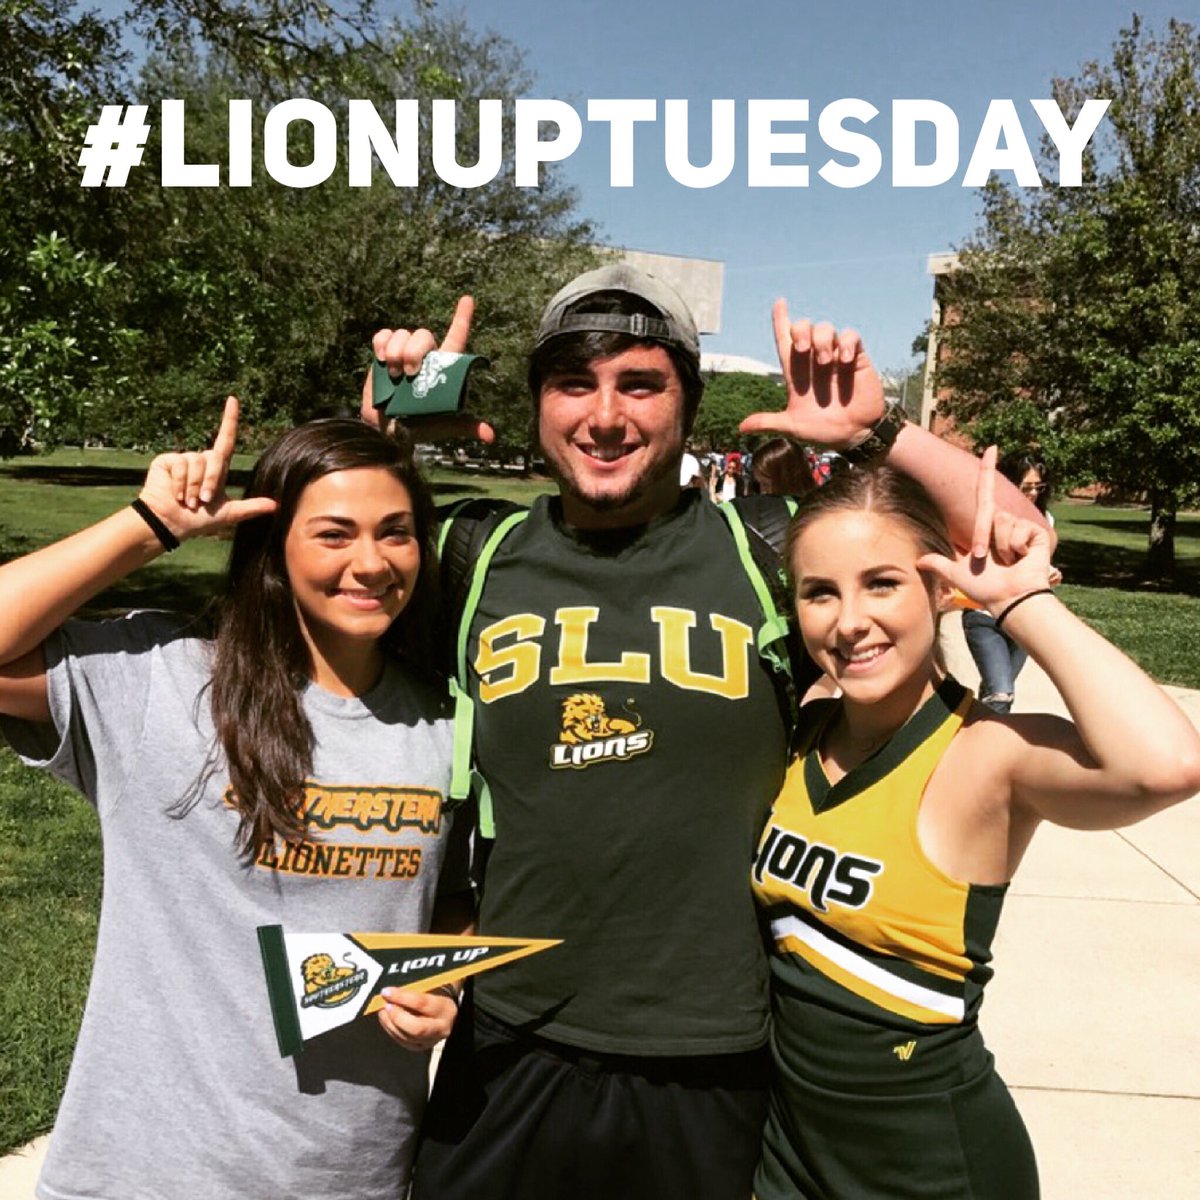 Lion Up Tuesday